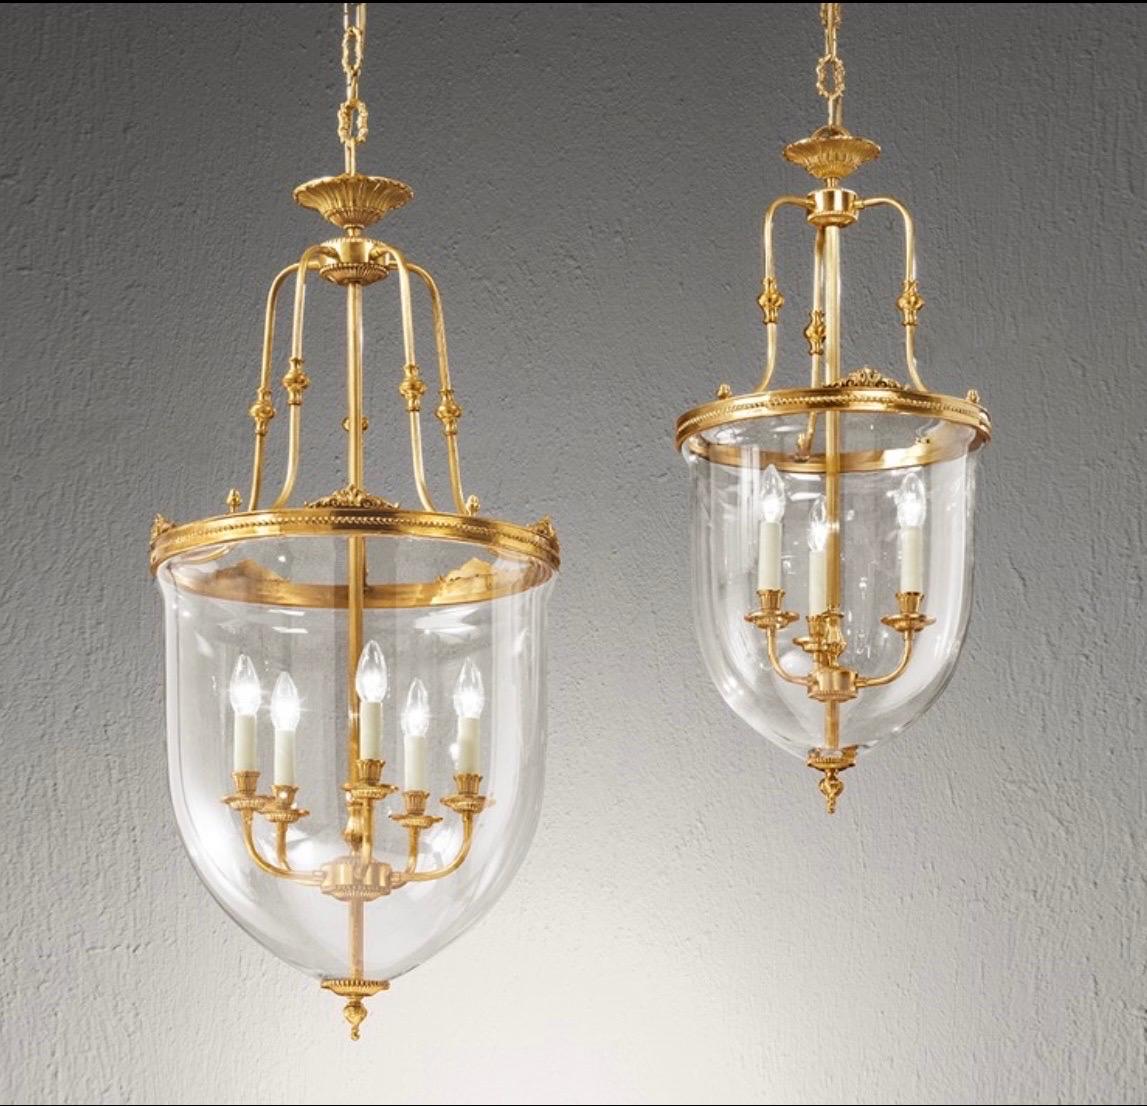 Two French Modern Neoclassical Style Brass and Blown Glass Chandeliers/ Lanterns For Sale 4